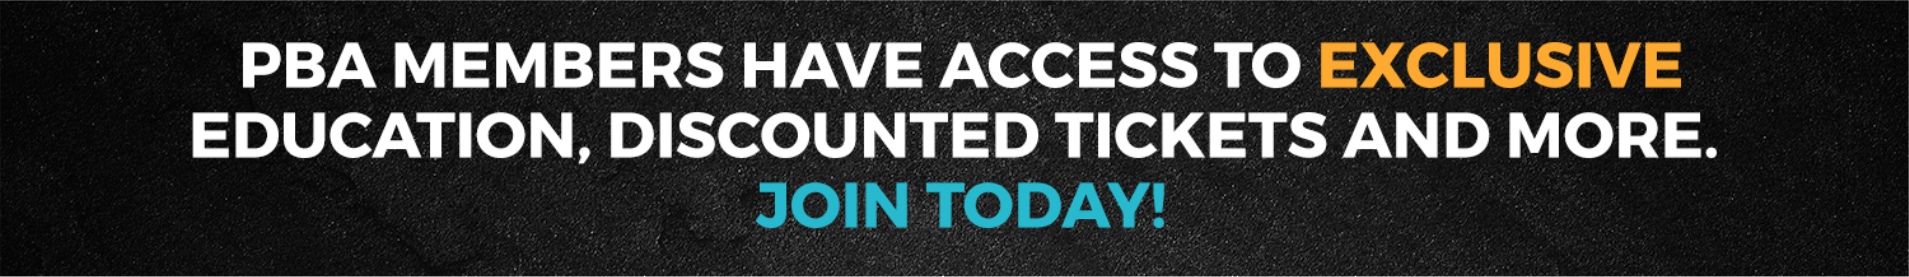 
PBA Members have access to exclusive education, discounted tickets and more! Join today!